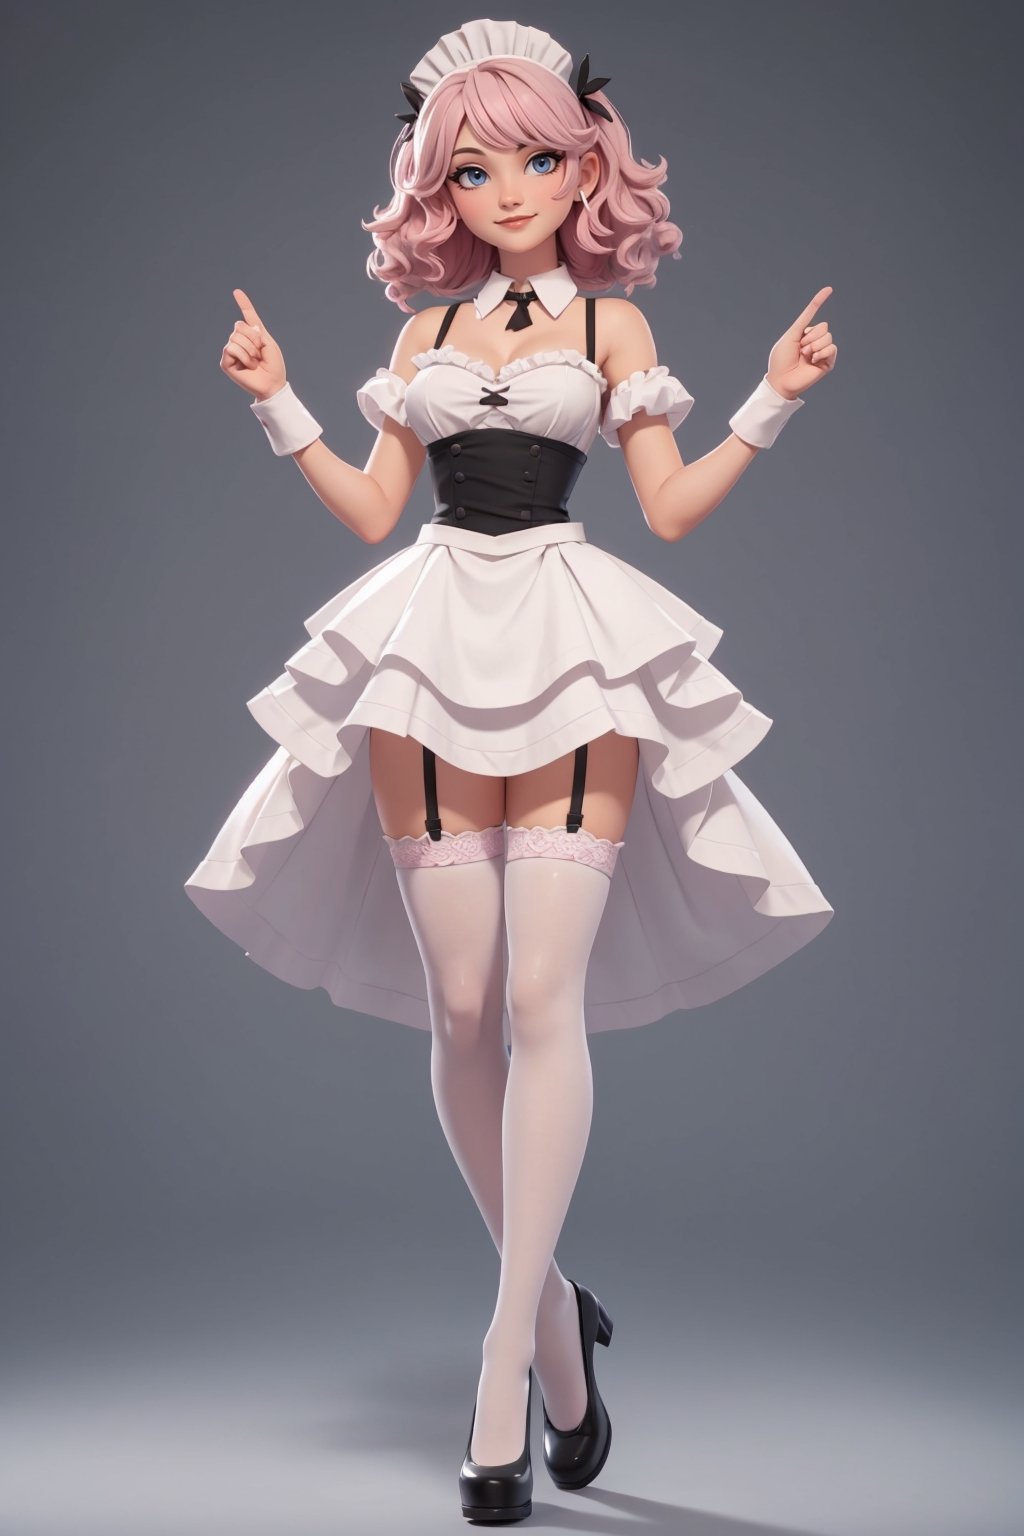 character sheet, beautiful, good hands, full body, good body, 18 year old girl body, sexy pose, full_body,character_sheet, shoulder length fluffy semi wavy hair, pink hair, maid clothes, white stockings, only stockings